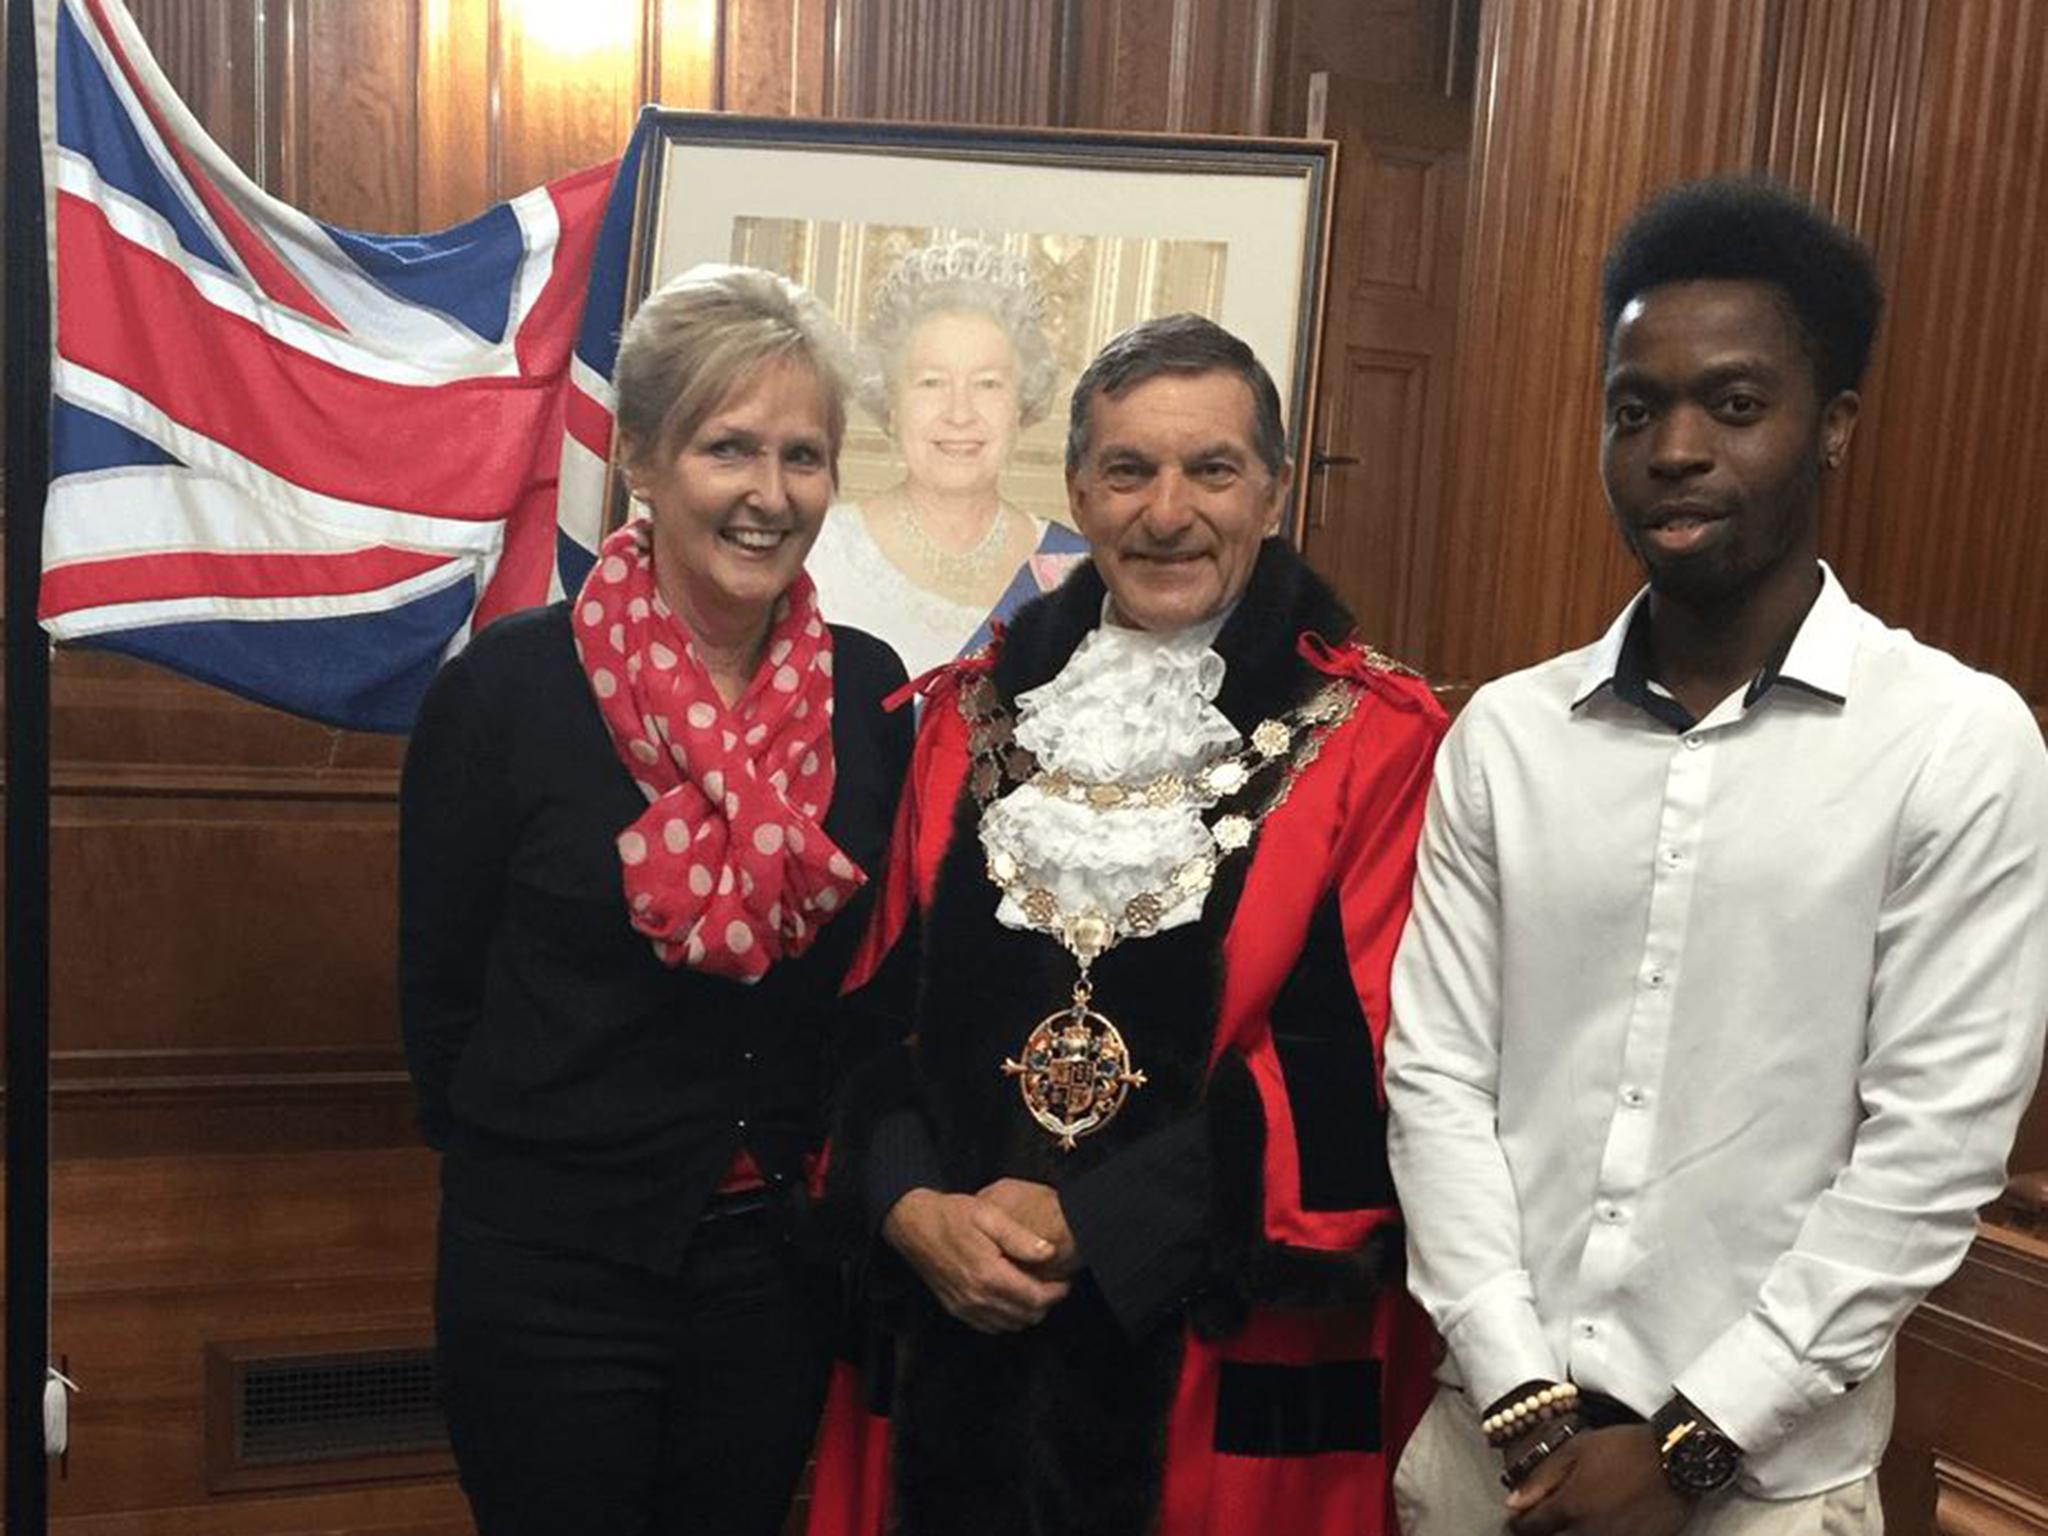 Tunde Jaji with his old teacher and the mayor of Bournemouth